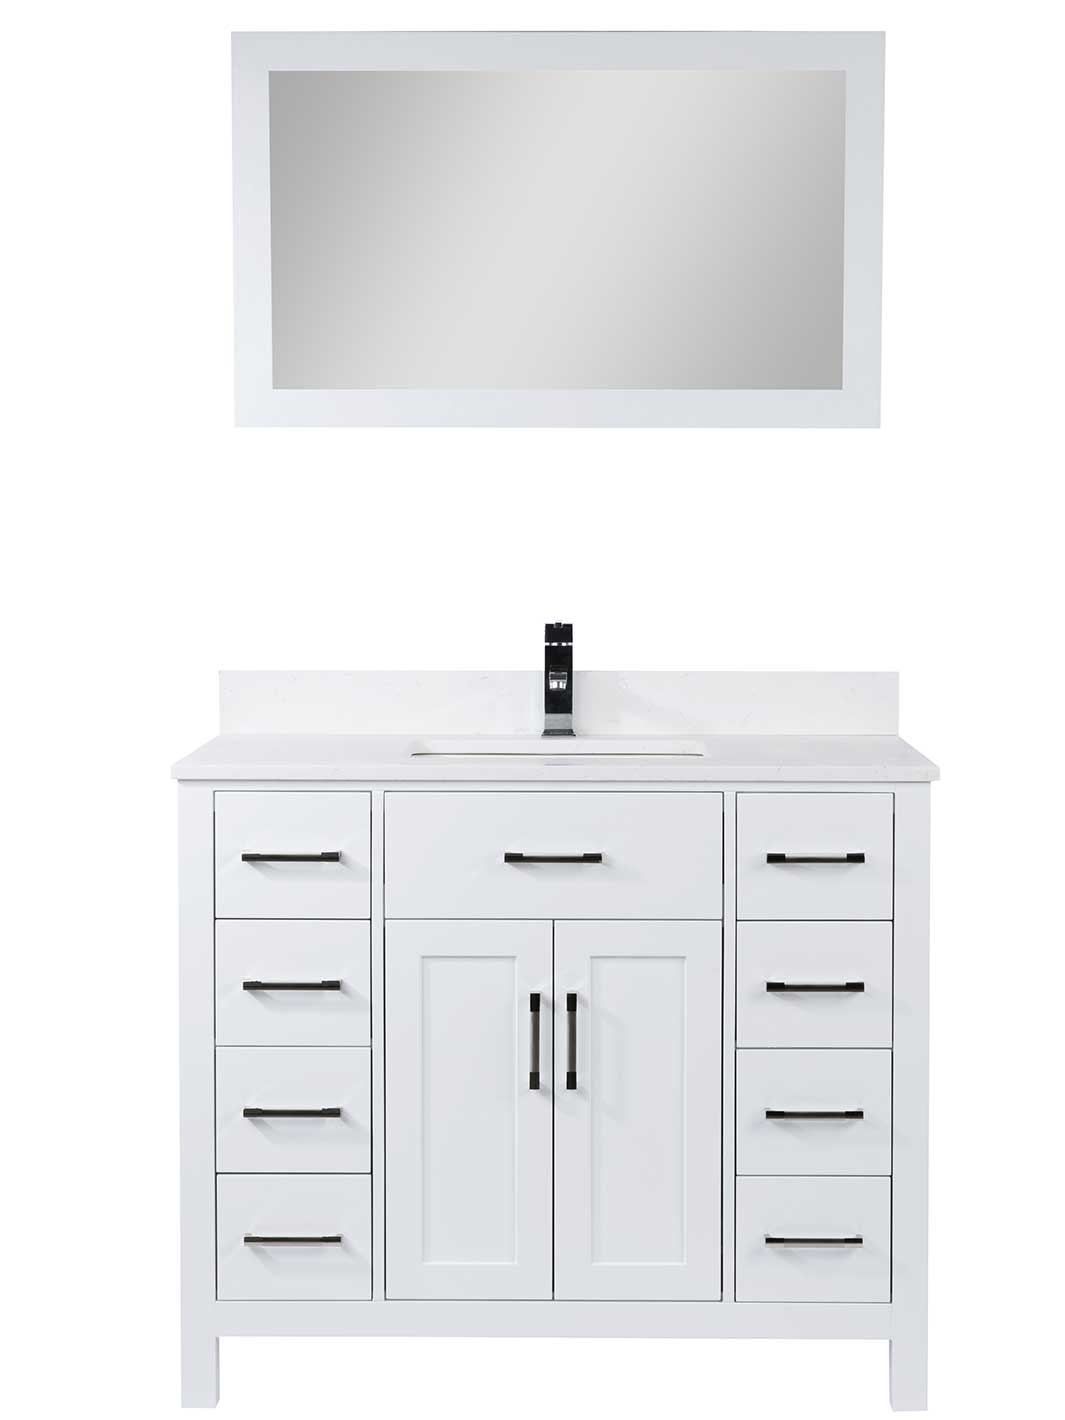 42 inch vanity in white with 3 drawers on either side and a cpboard beneath the sink